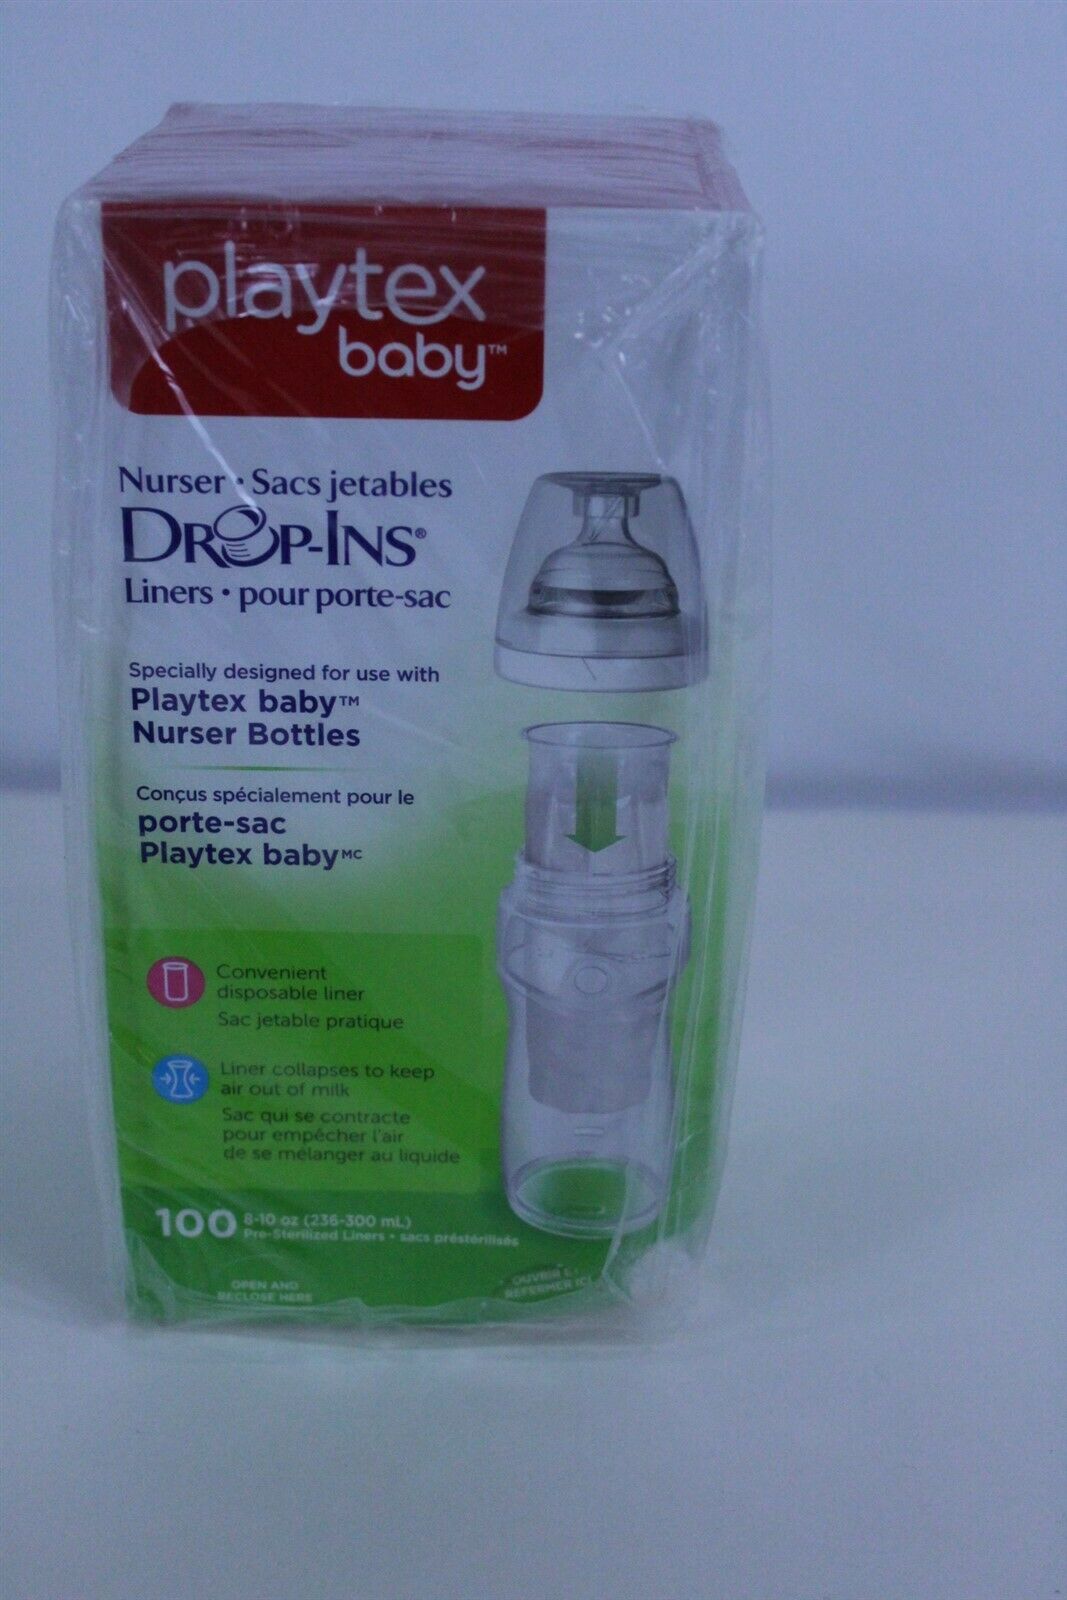 Playtex Baby Nurser Drop-ins Baby Bottle Disposable Liners 8-10oz 100 Ct Box